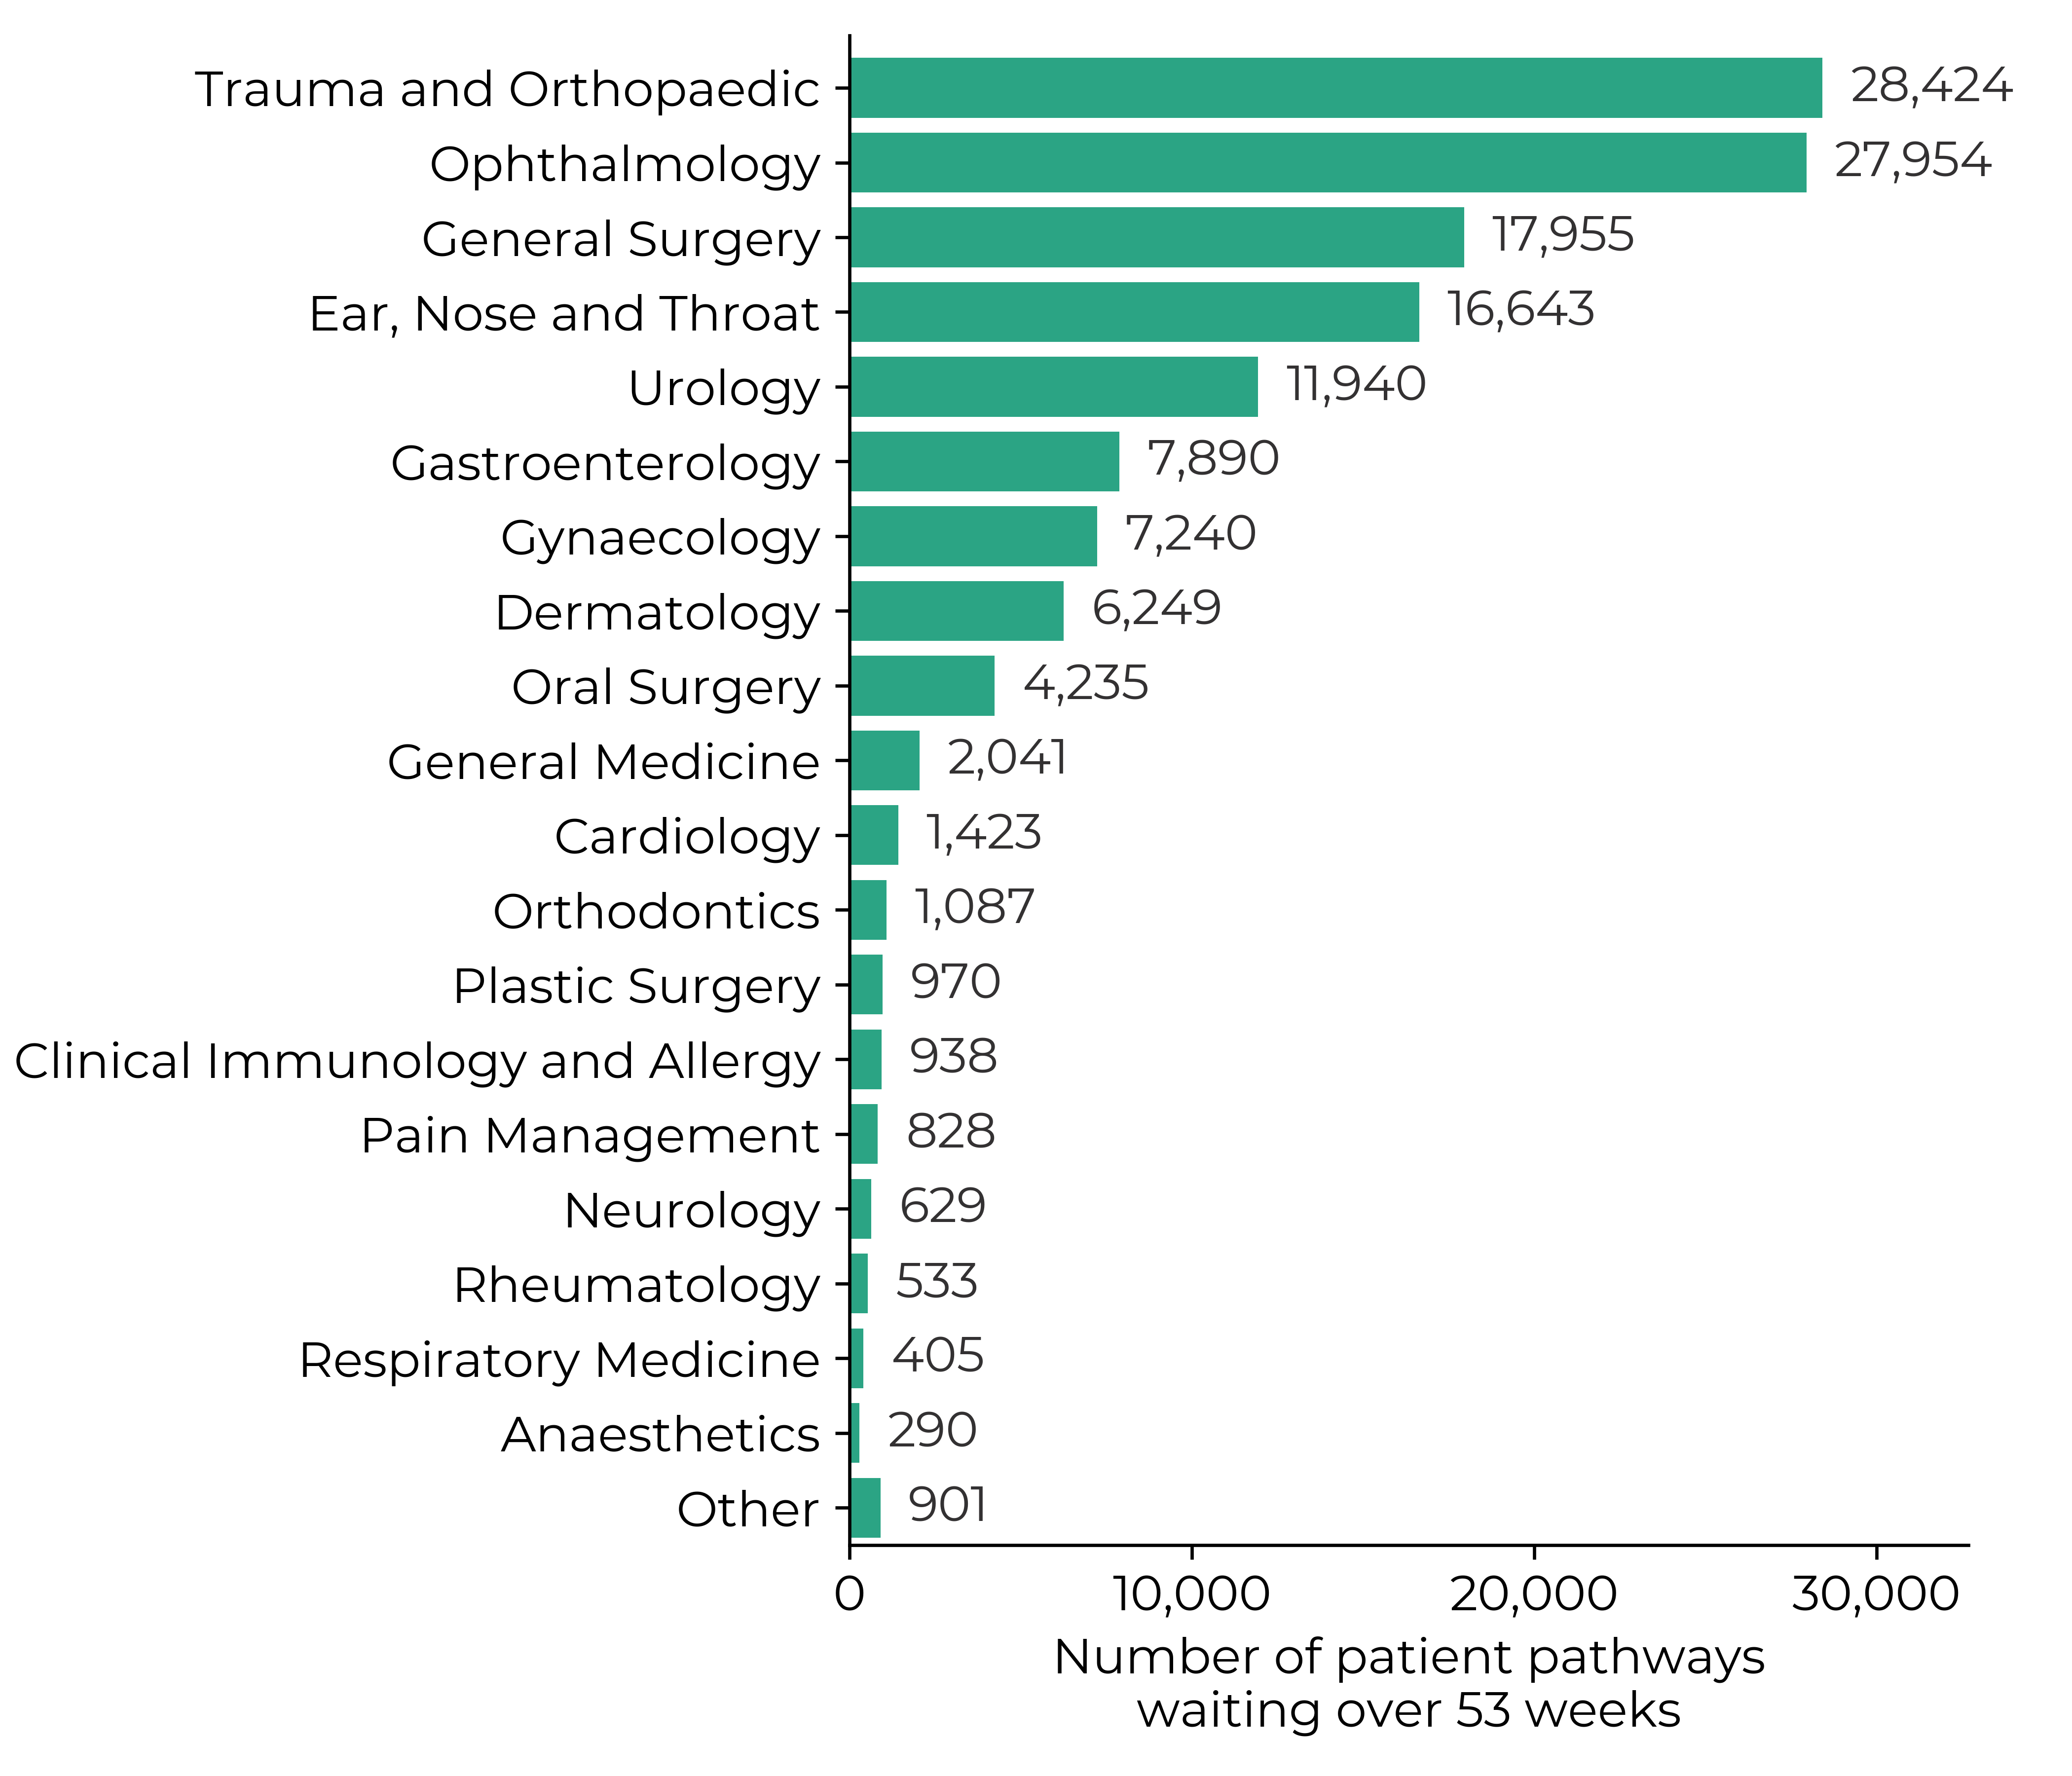 Graph showing the number of patient pathways waiting over 53 weeks in May 2022. Trauma and Orthopaedic (39,756), General Surgery (26,322) and Ophthalmology (25,337) had the largest number of patient pathways waiting. Against an ambition of no-one waiting more than 1 year in most specialties by spring 2025